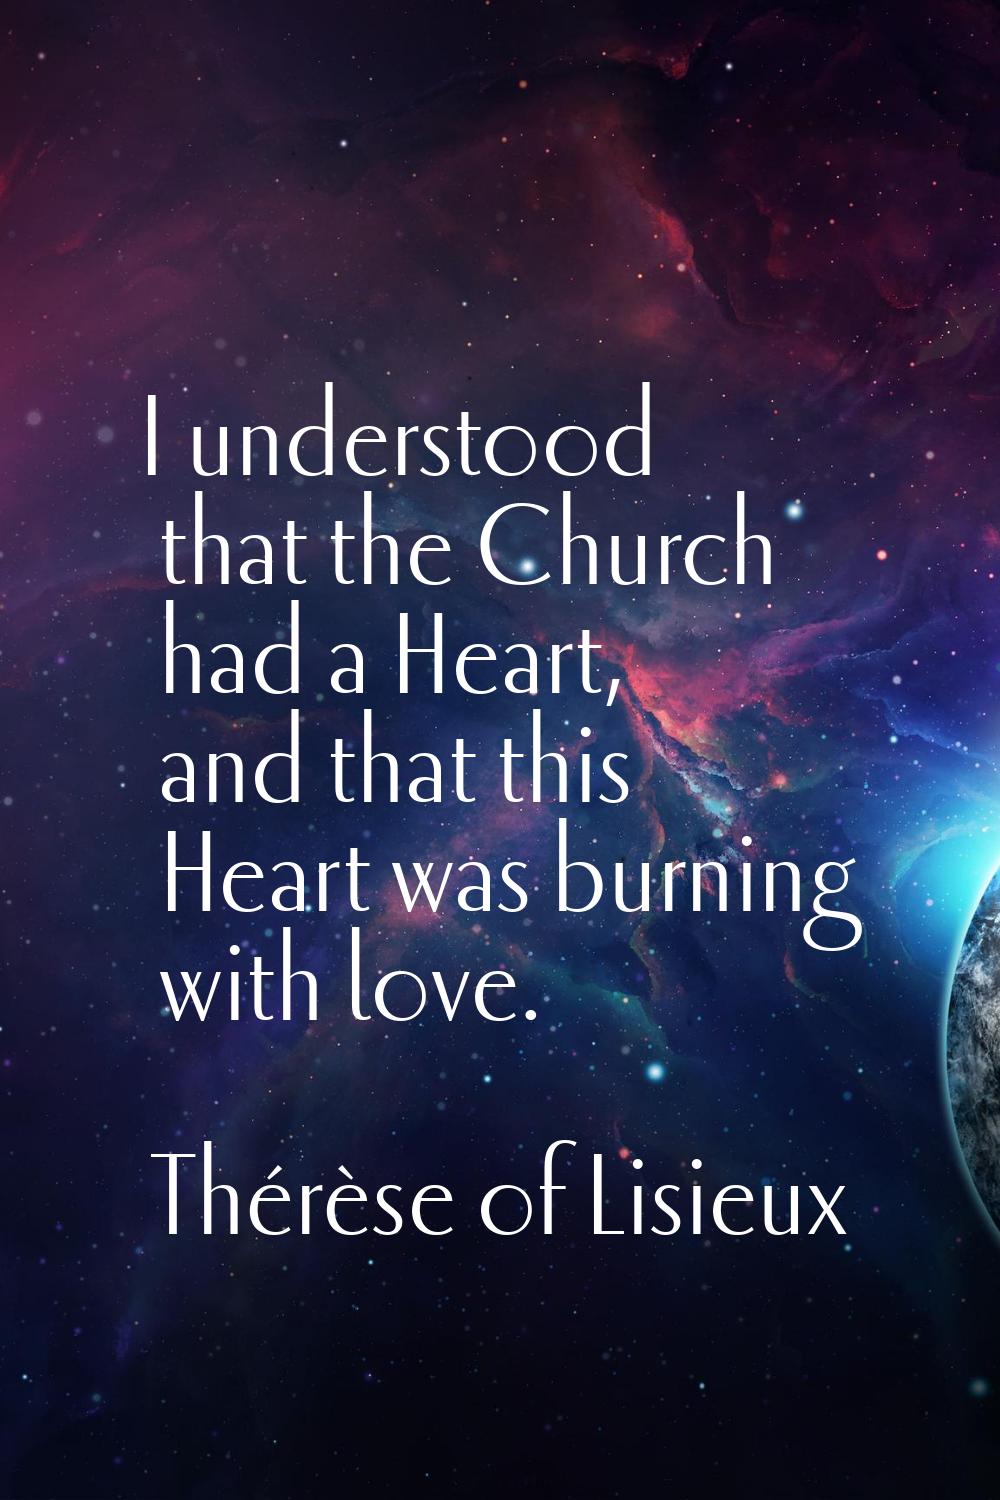 I understood that the Church had a Heart, and that this Heart was burning with love.